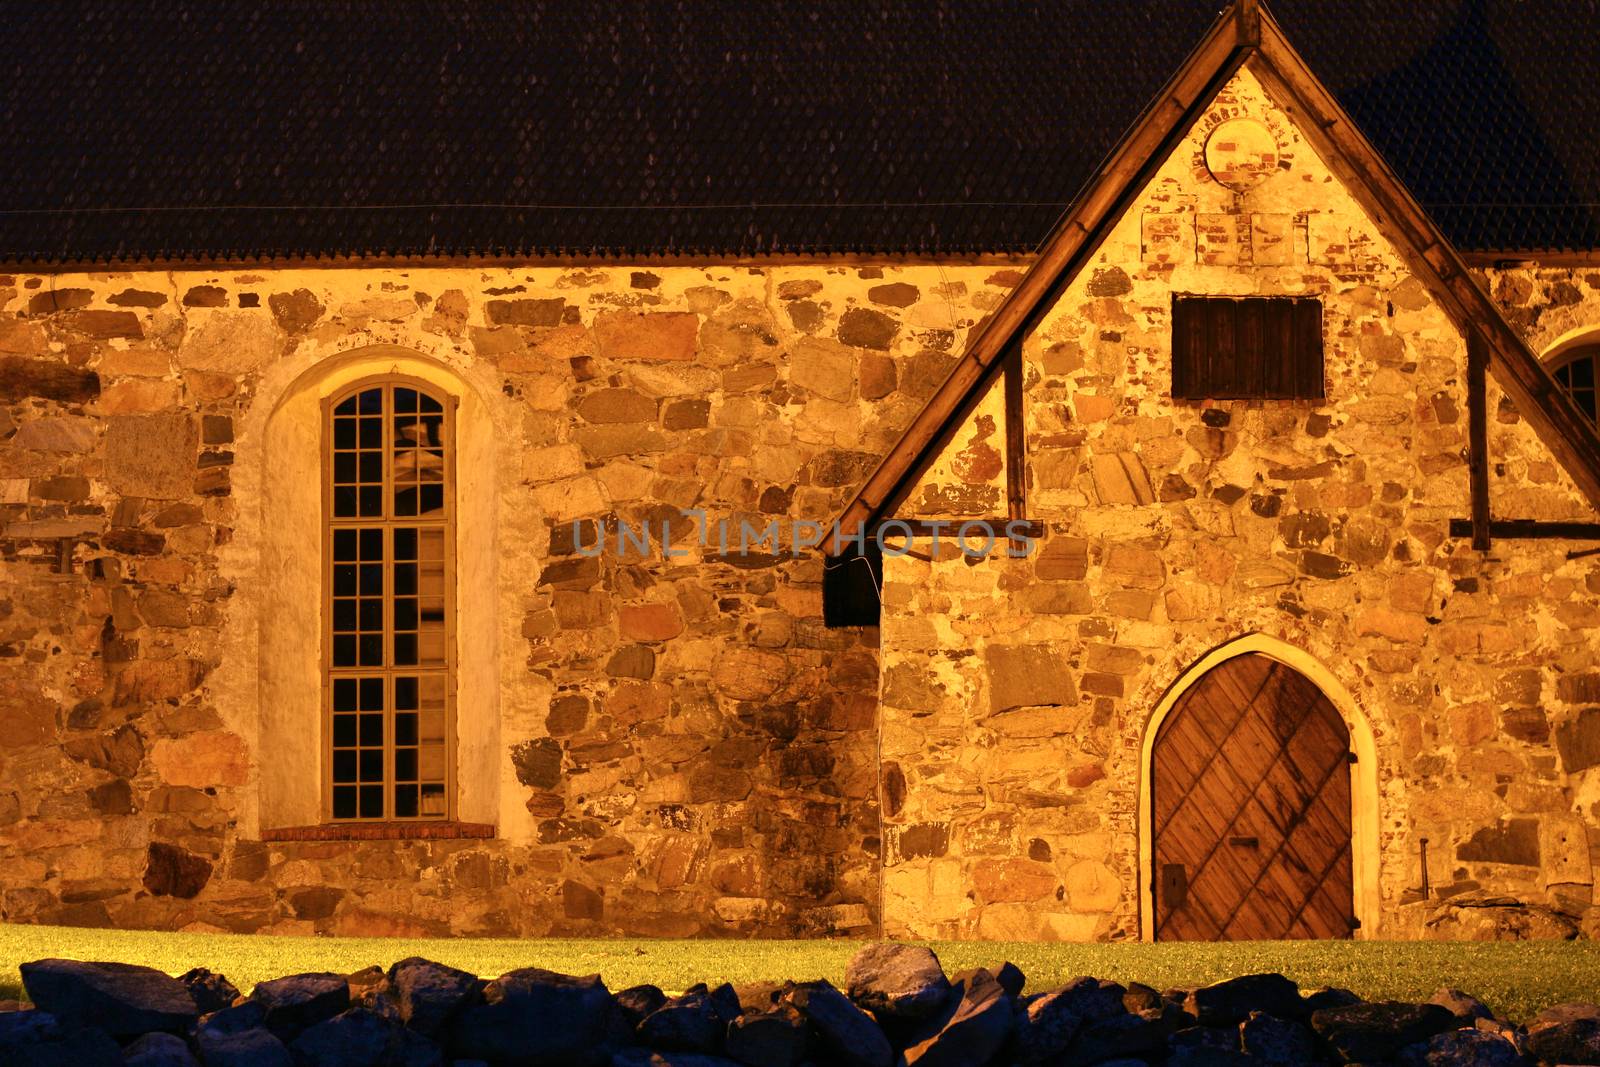 Lighted stone wall of an old church. Photo taken at night in the dark.